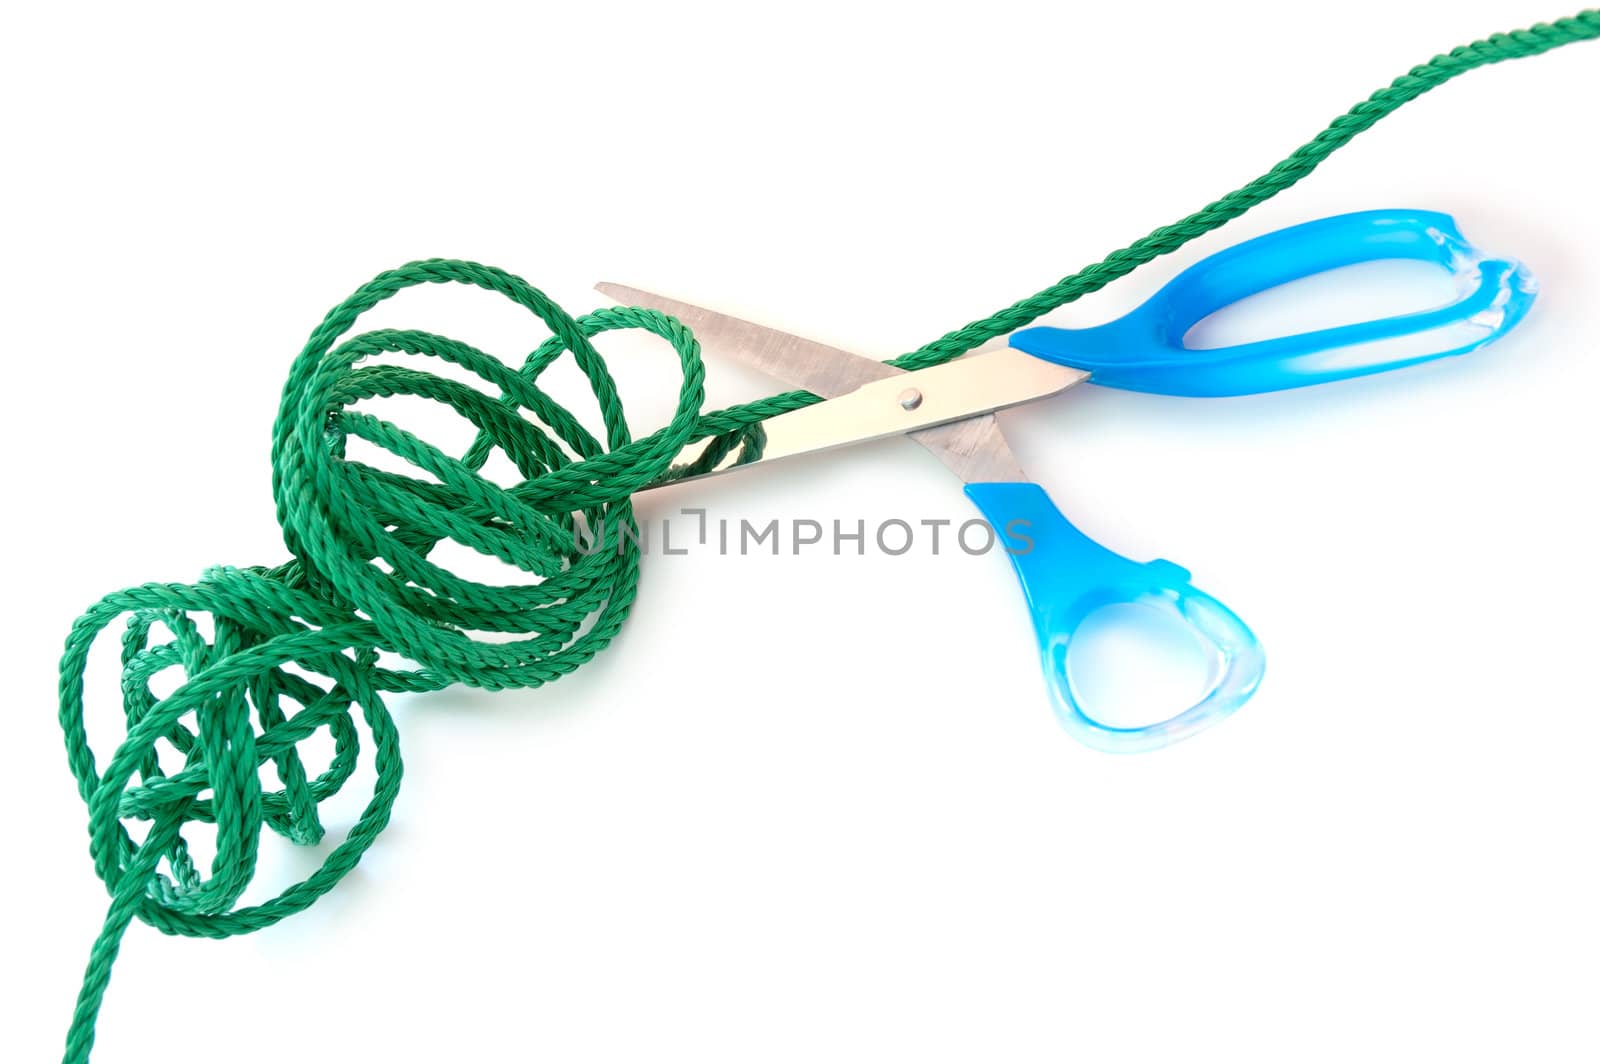 Green synthetic cord and steel scissors on overwhite background.